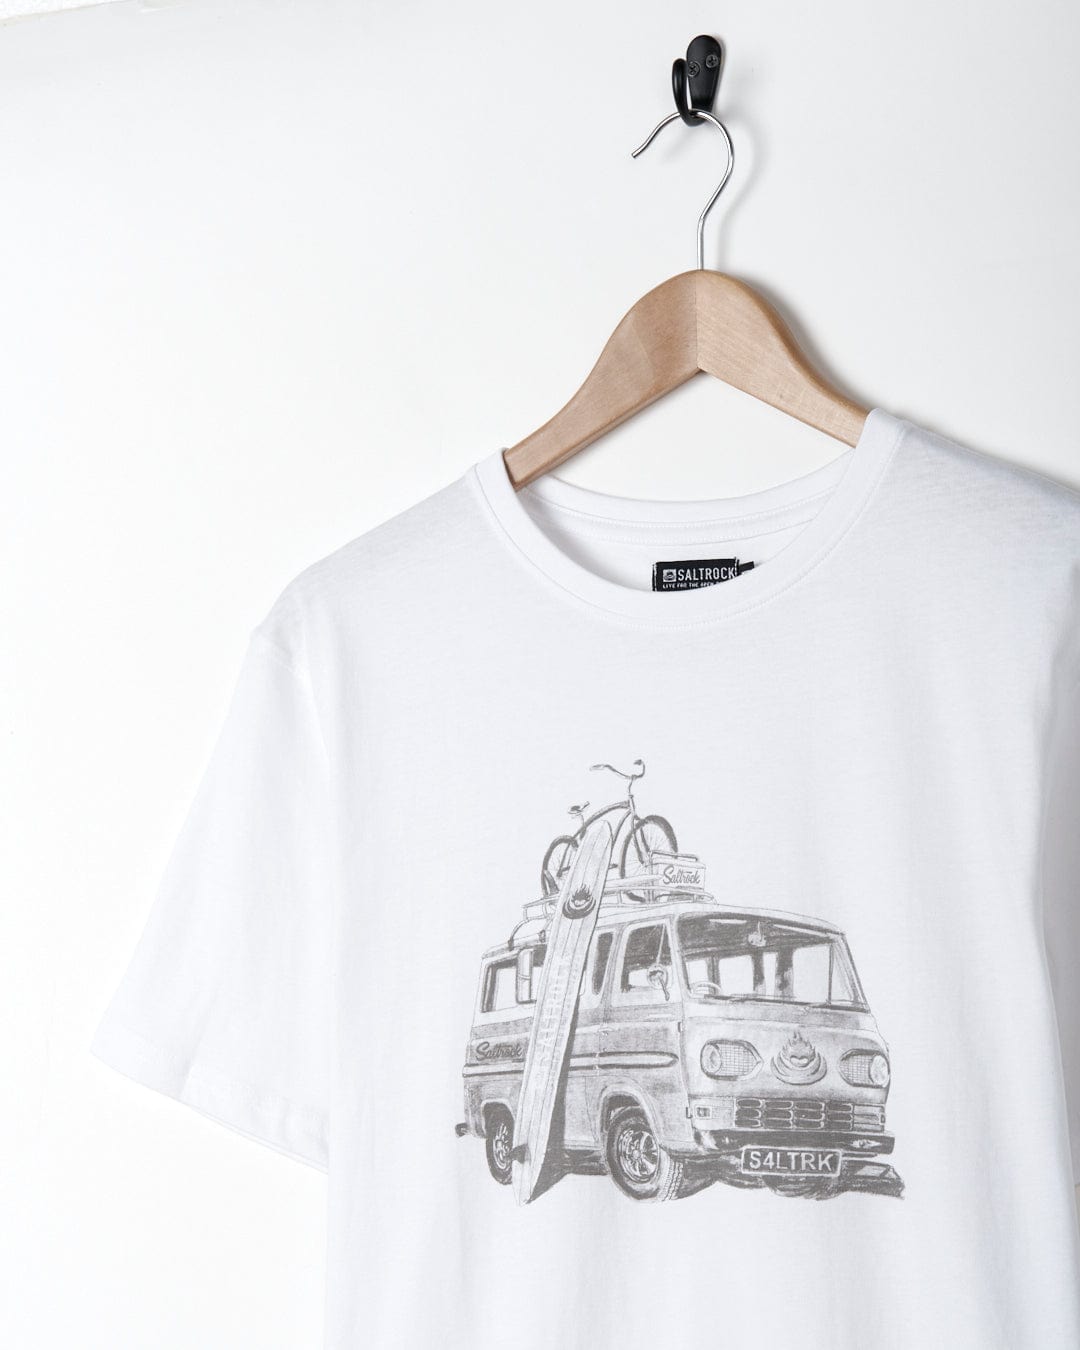 A Saltrock Re-Wild - Mens Short Sleeve T-Shirt in White with a surfing graphic on it.